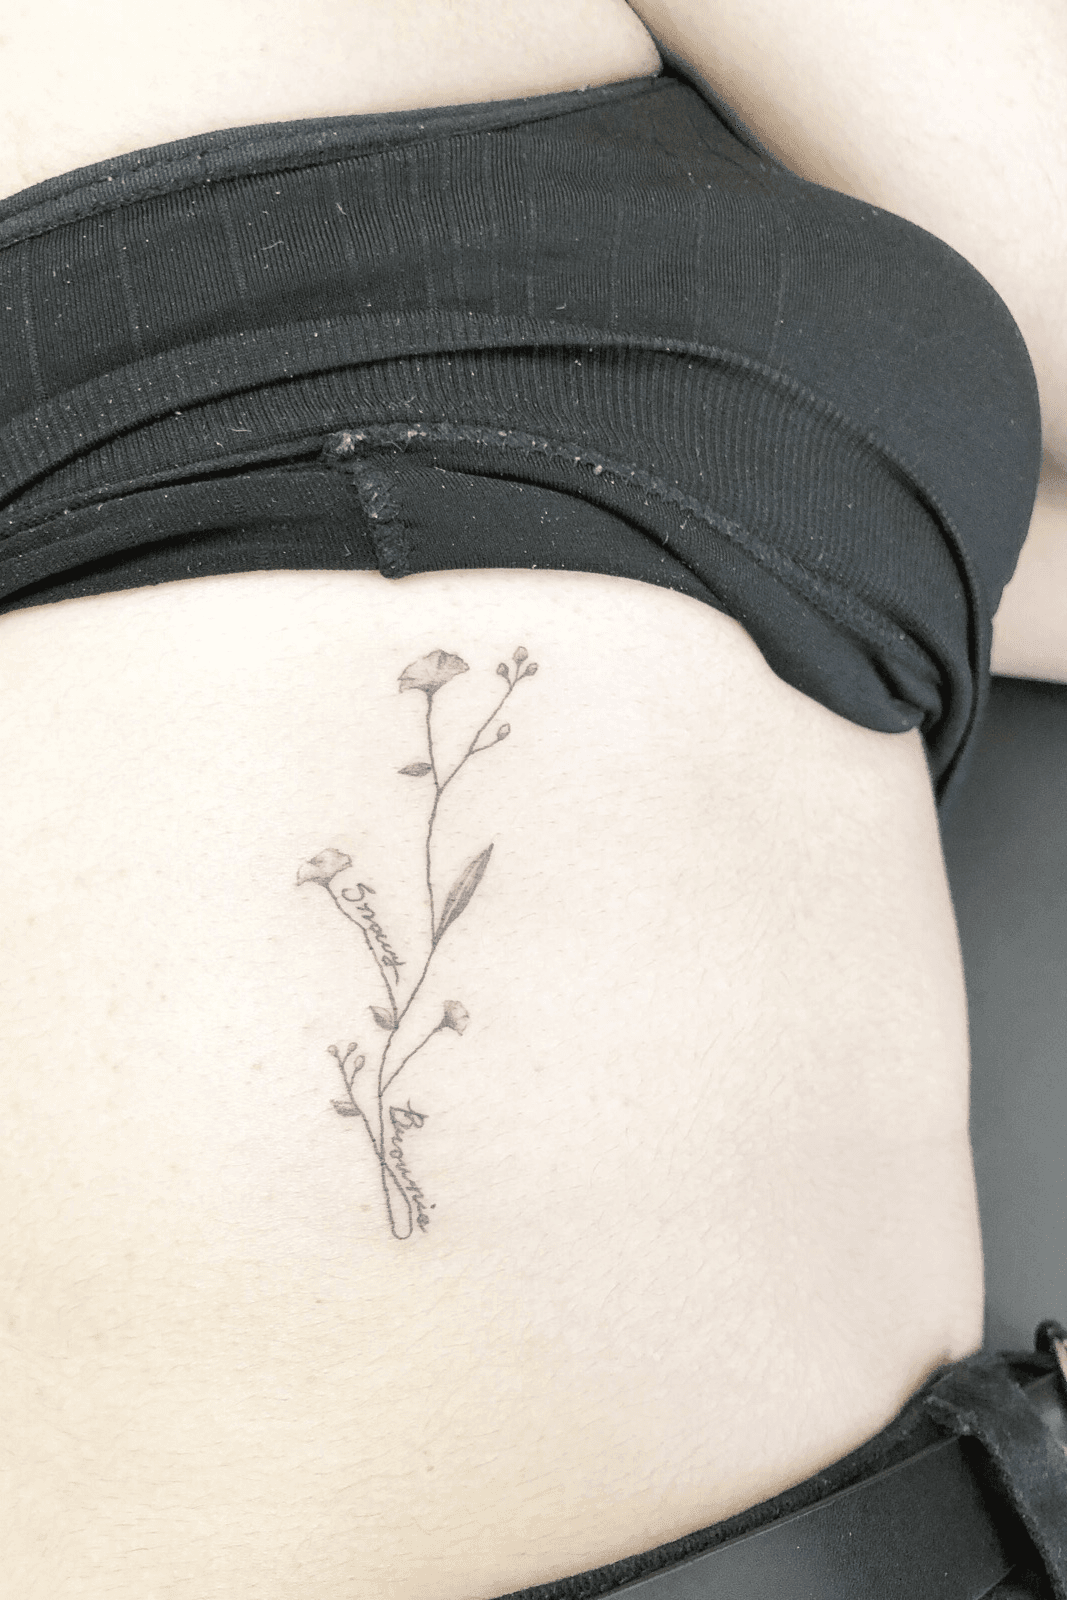 Carnations  Babys Breath done by Grace at FoxMoon Tattoos in Brisbane   rtattoos